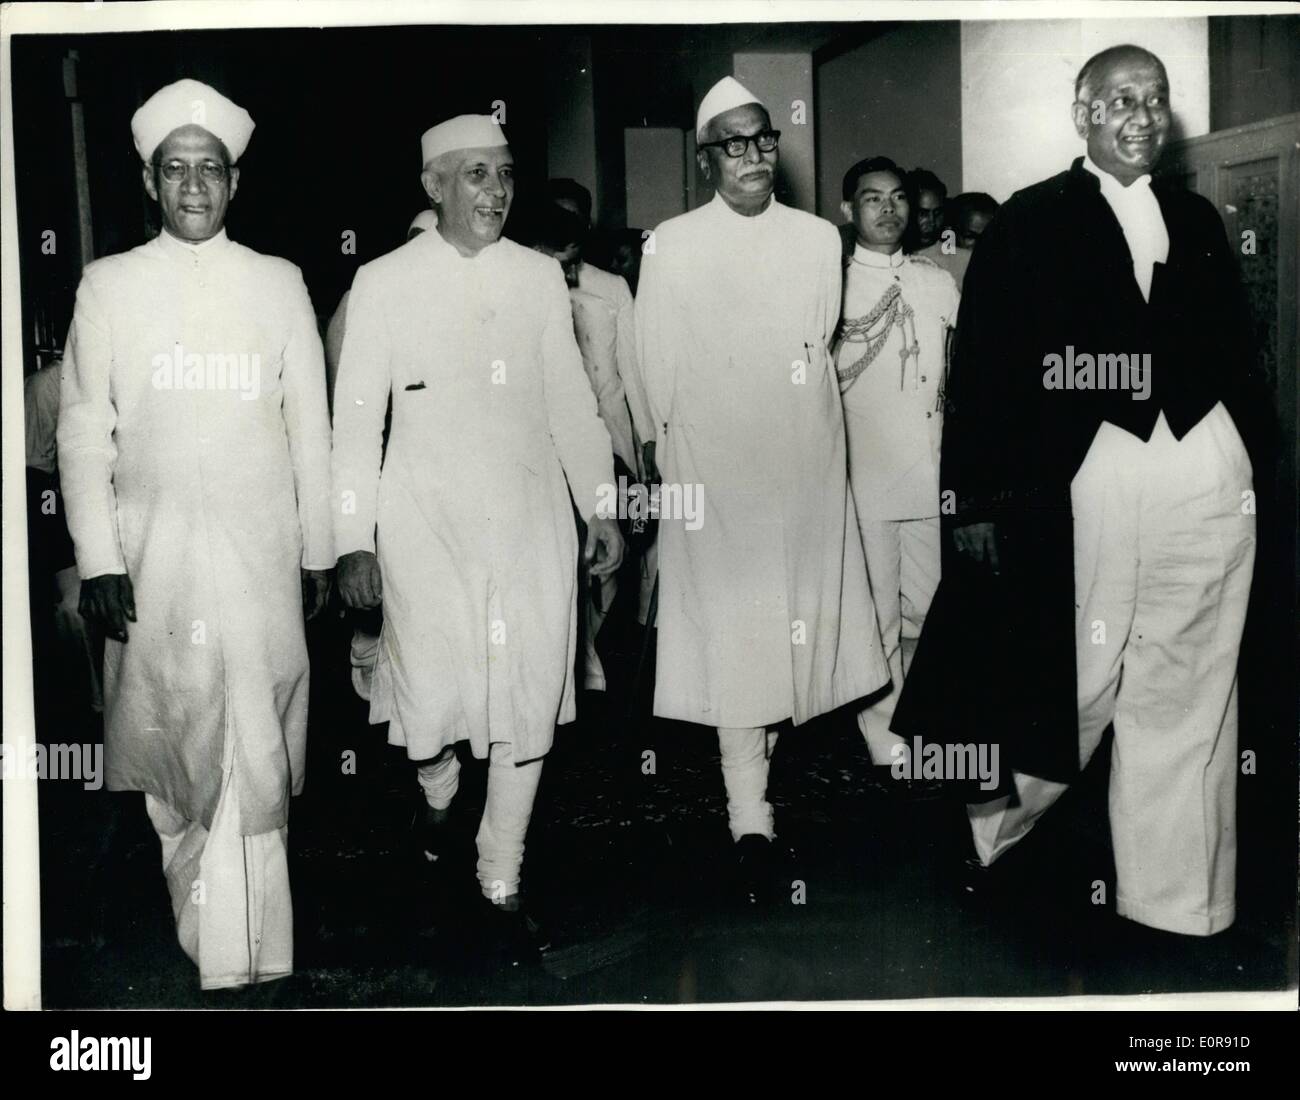 Aug. 08, 1958 - Opening of New Indian Supreme Court building.: The President Dr. Rajendra Prasad and Prime Minister Mr. Nehru were among the many personalities who attended the opening of the new Supreme court building in New Delhi recently. Photo shows the Vice President Dr. S. Rahakrishnan; Mr. Nehru; Dr. Prasad the President and Chief Justice of India Mr. S.R. Das arriving for the ceremony. Stock Photo